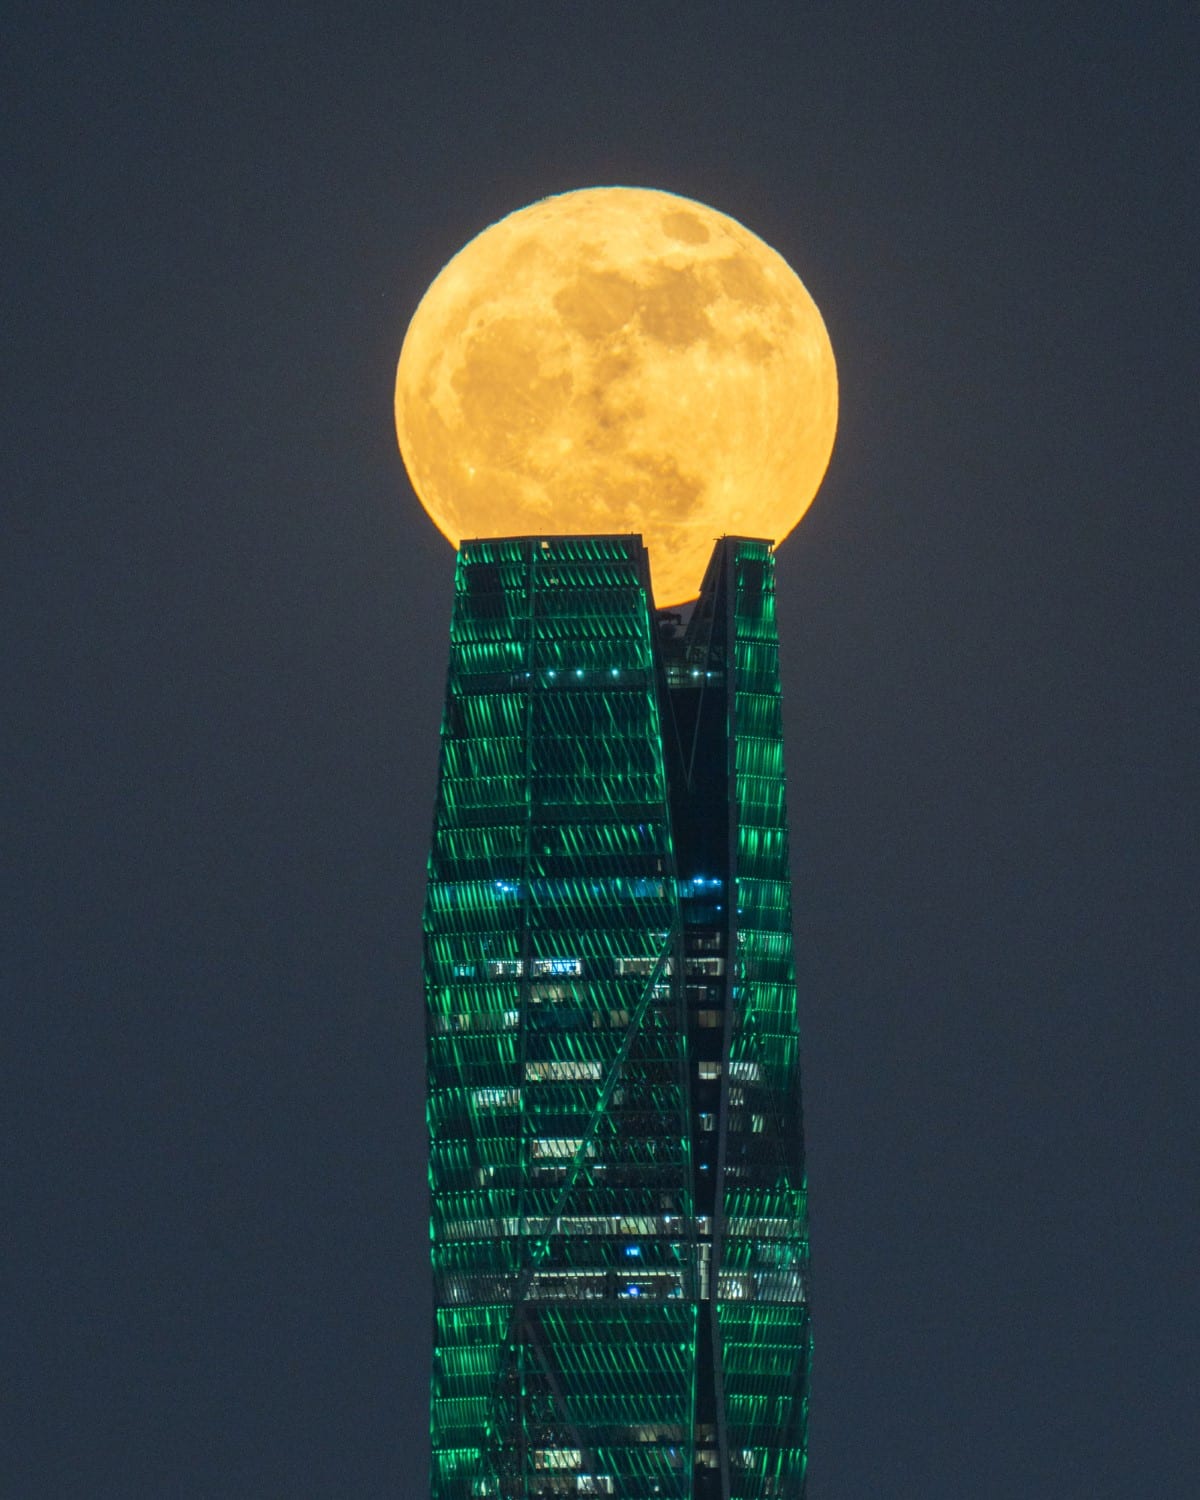 A supermoon sits at the top of the Saudi Public Investment Fund tower in Riyadh, Saudi Arabia.